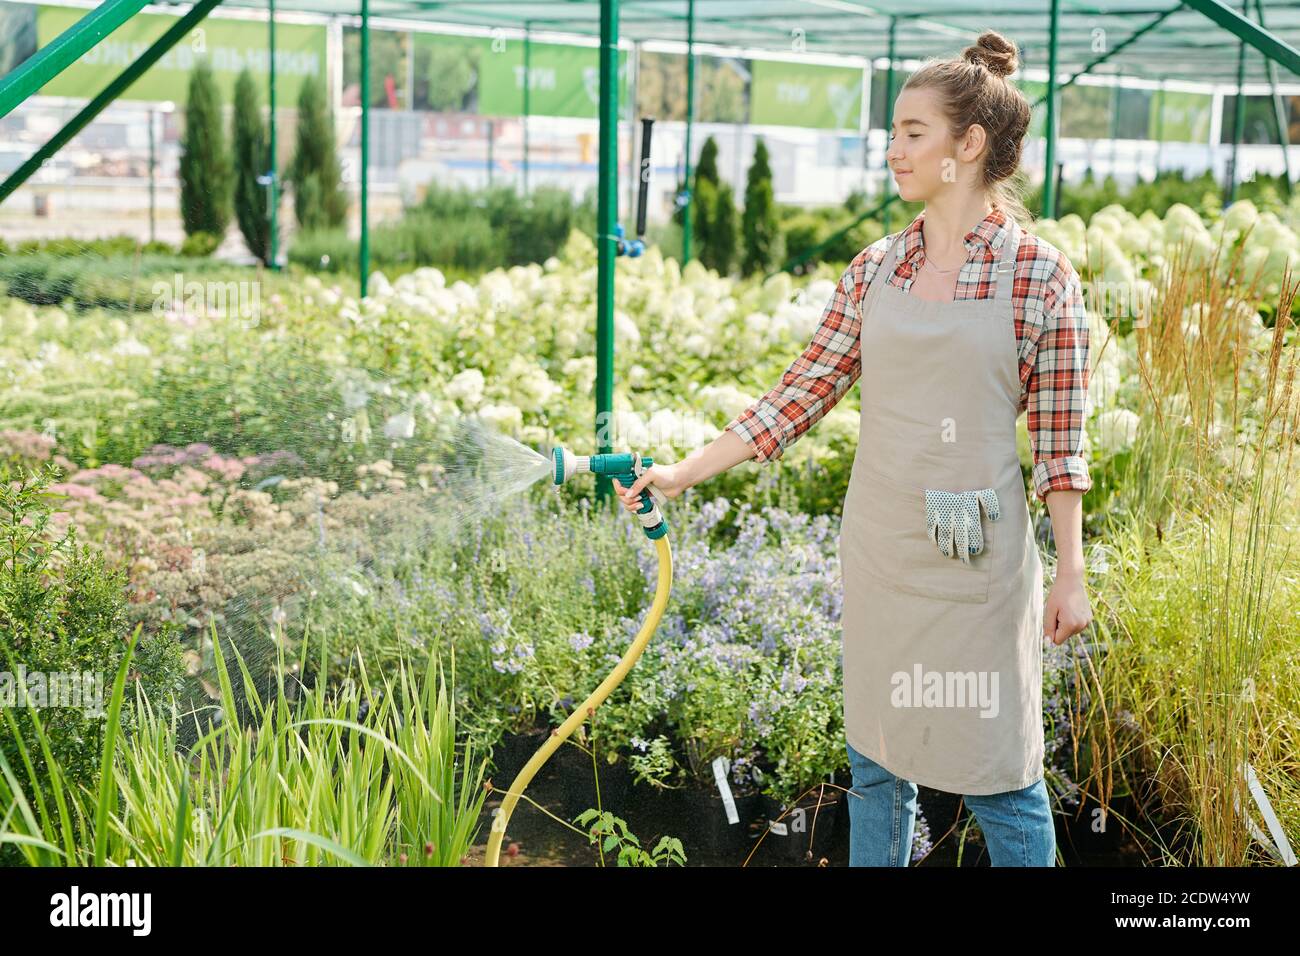 Young gardener in workwear watering green plants growing in large hothouse Stock Photo